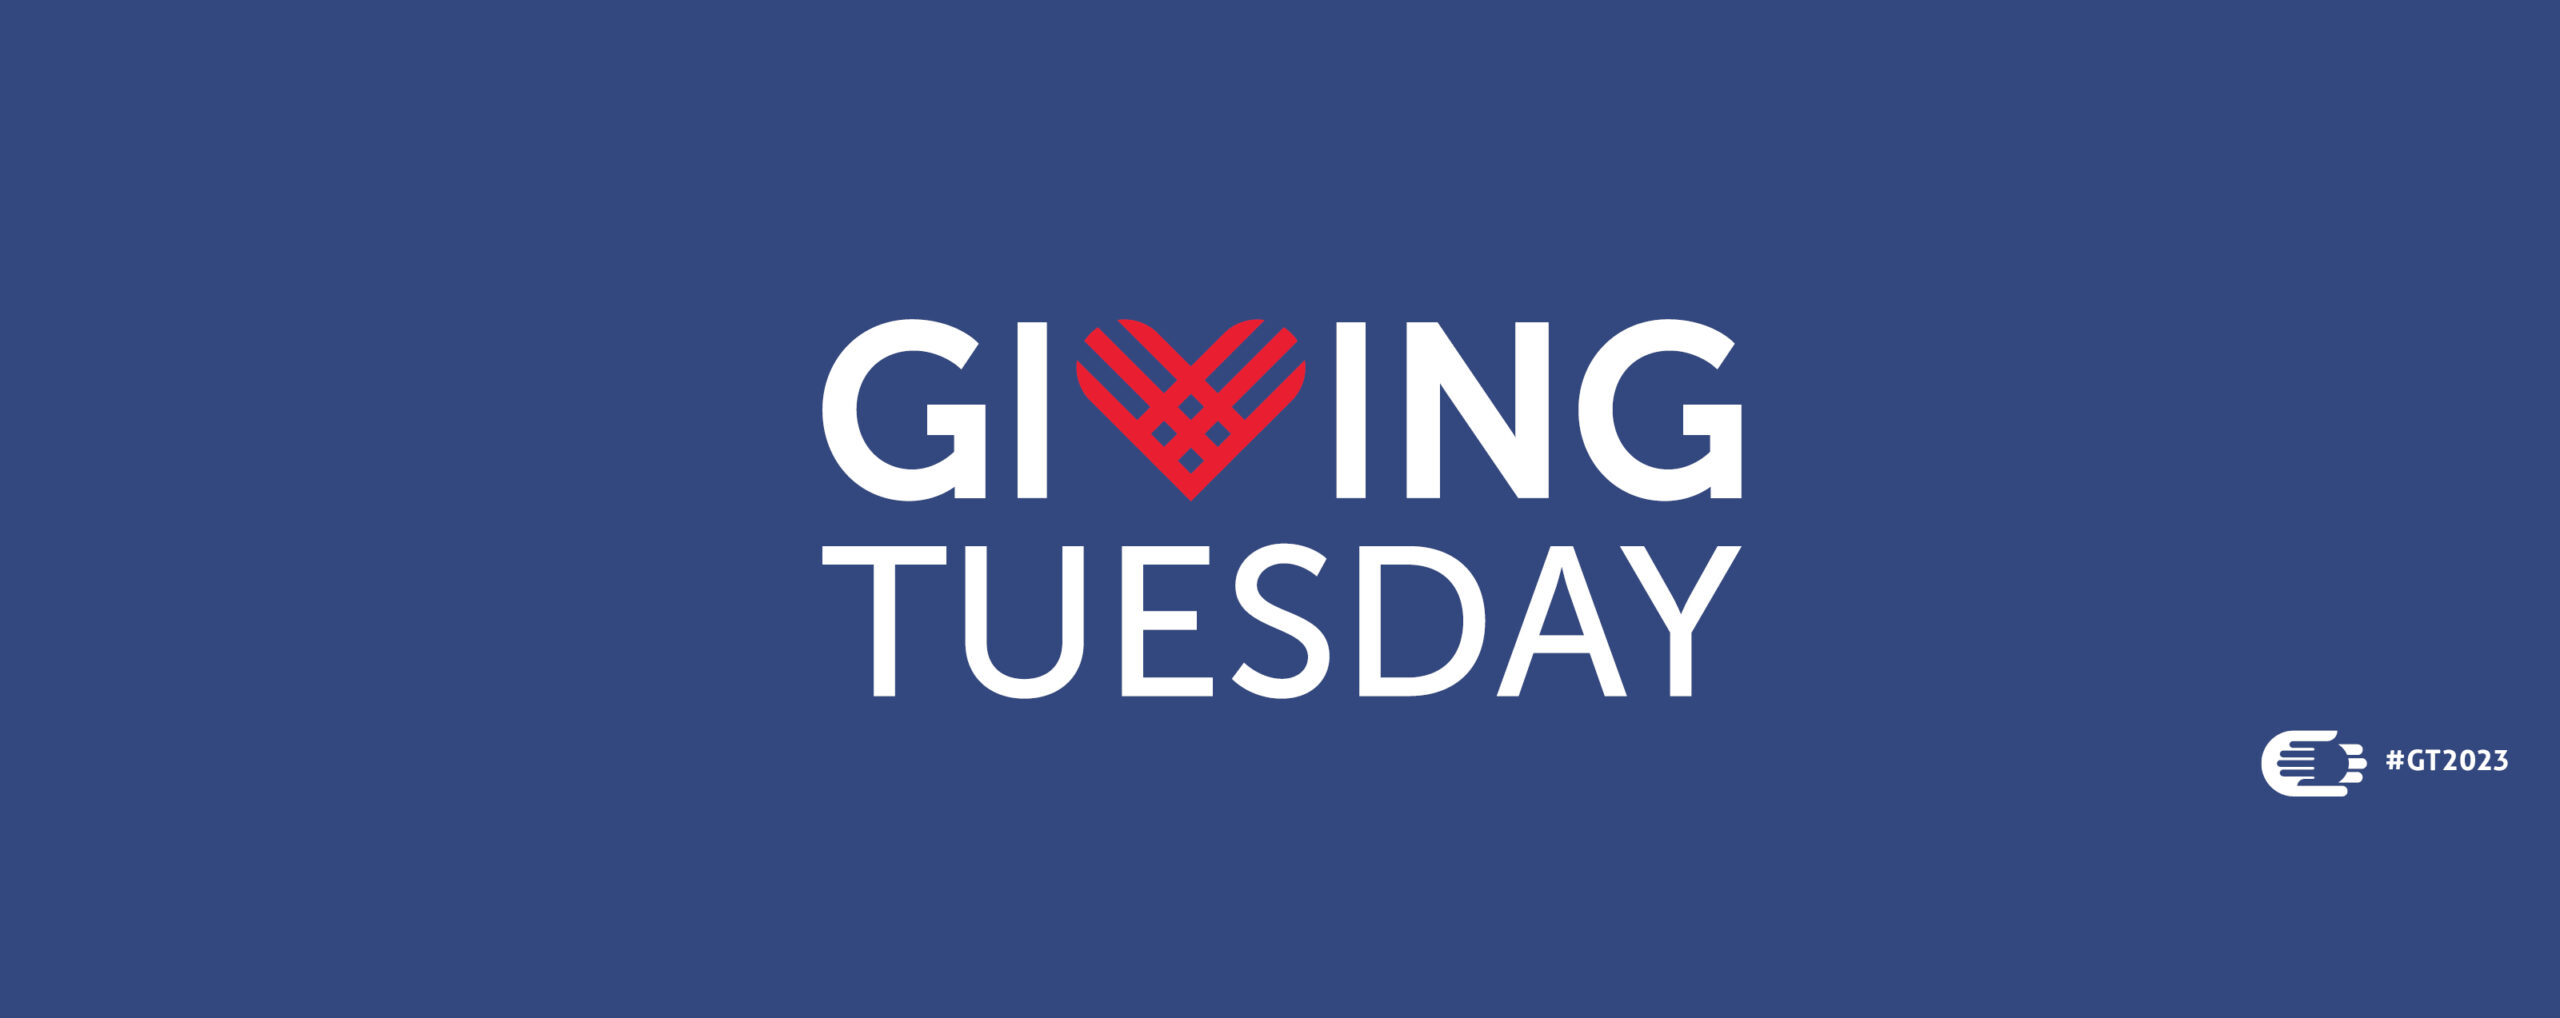 Giving Tuesday 2023 - Christian Family Care